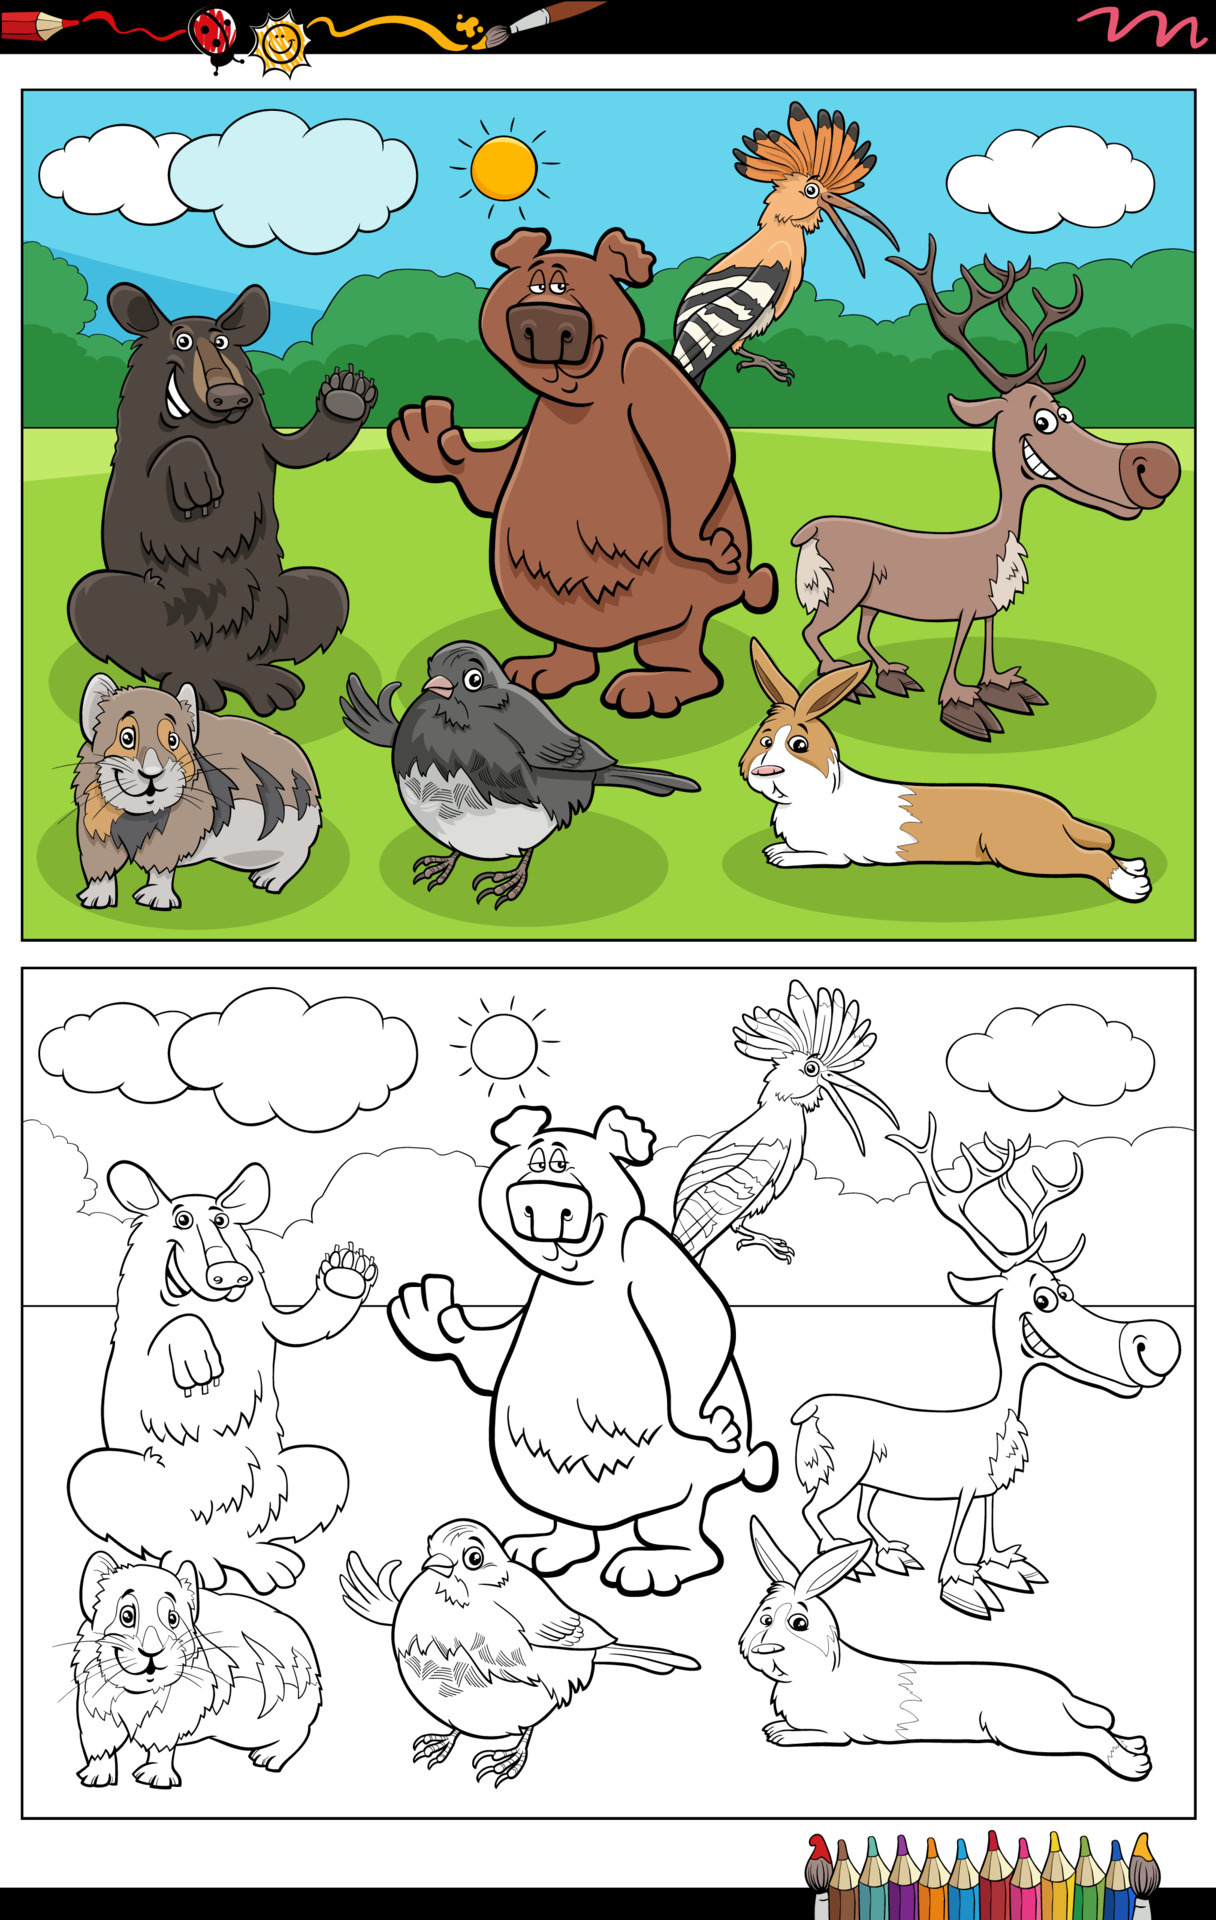 cartoon animals funny characters group coloring book page 6180484 Vector  Art at Vecteezy